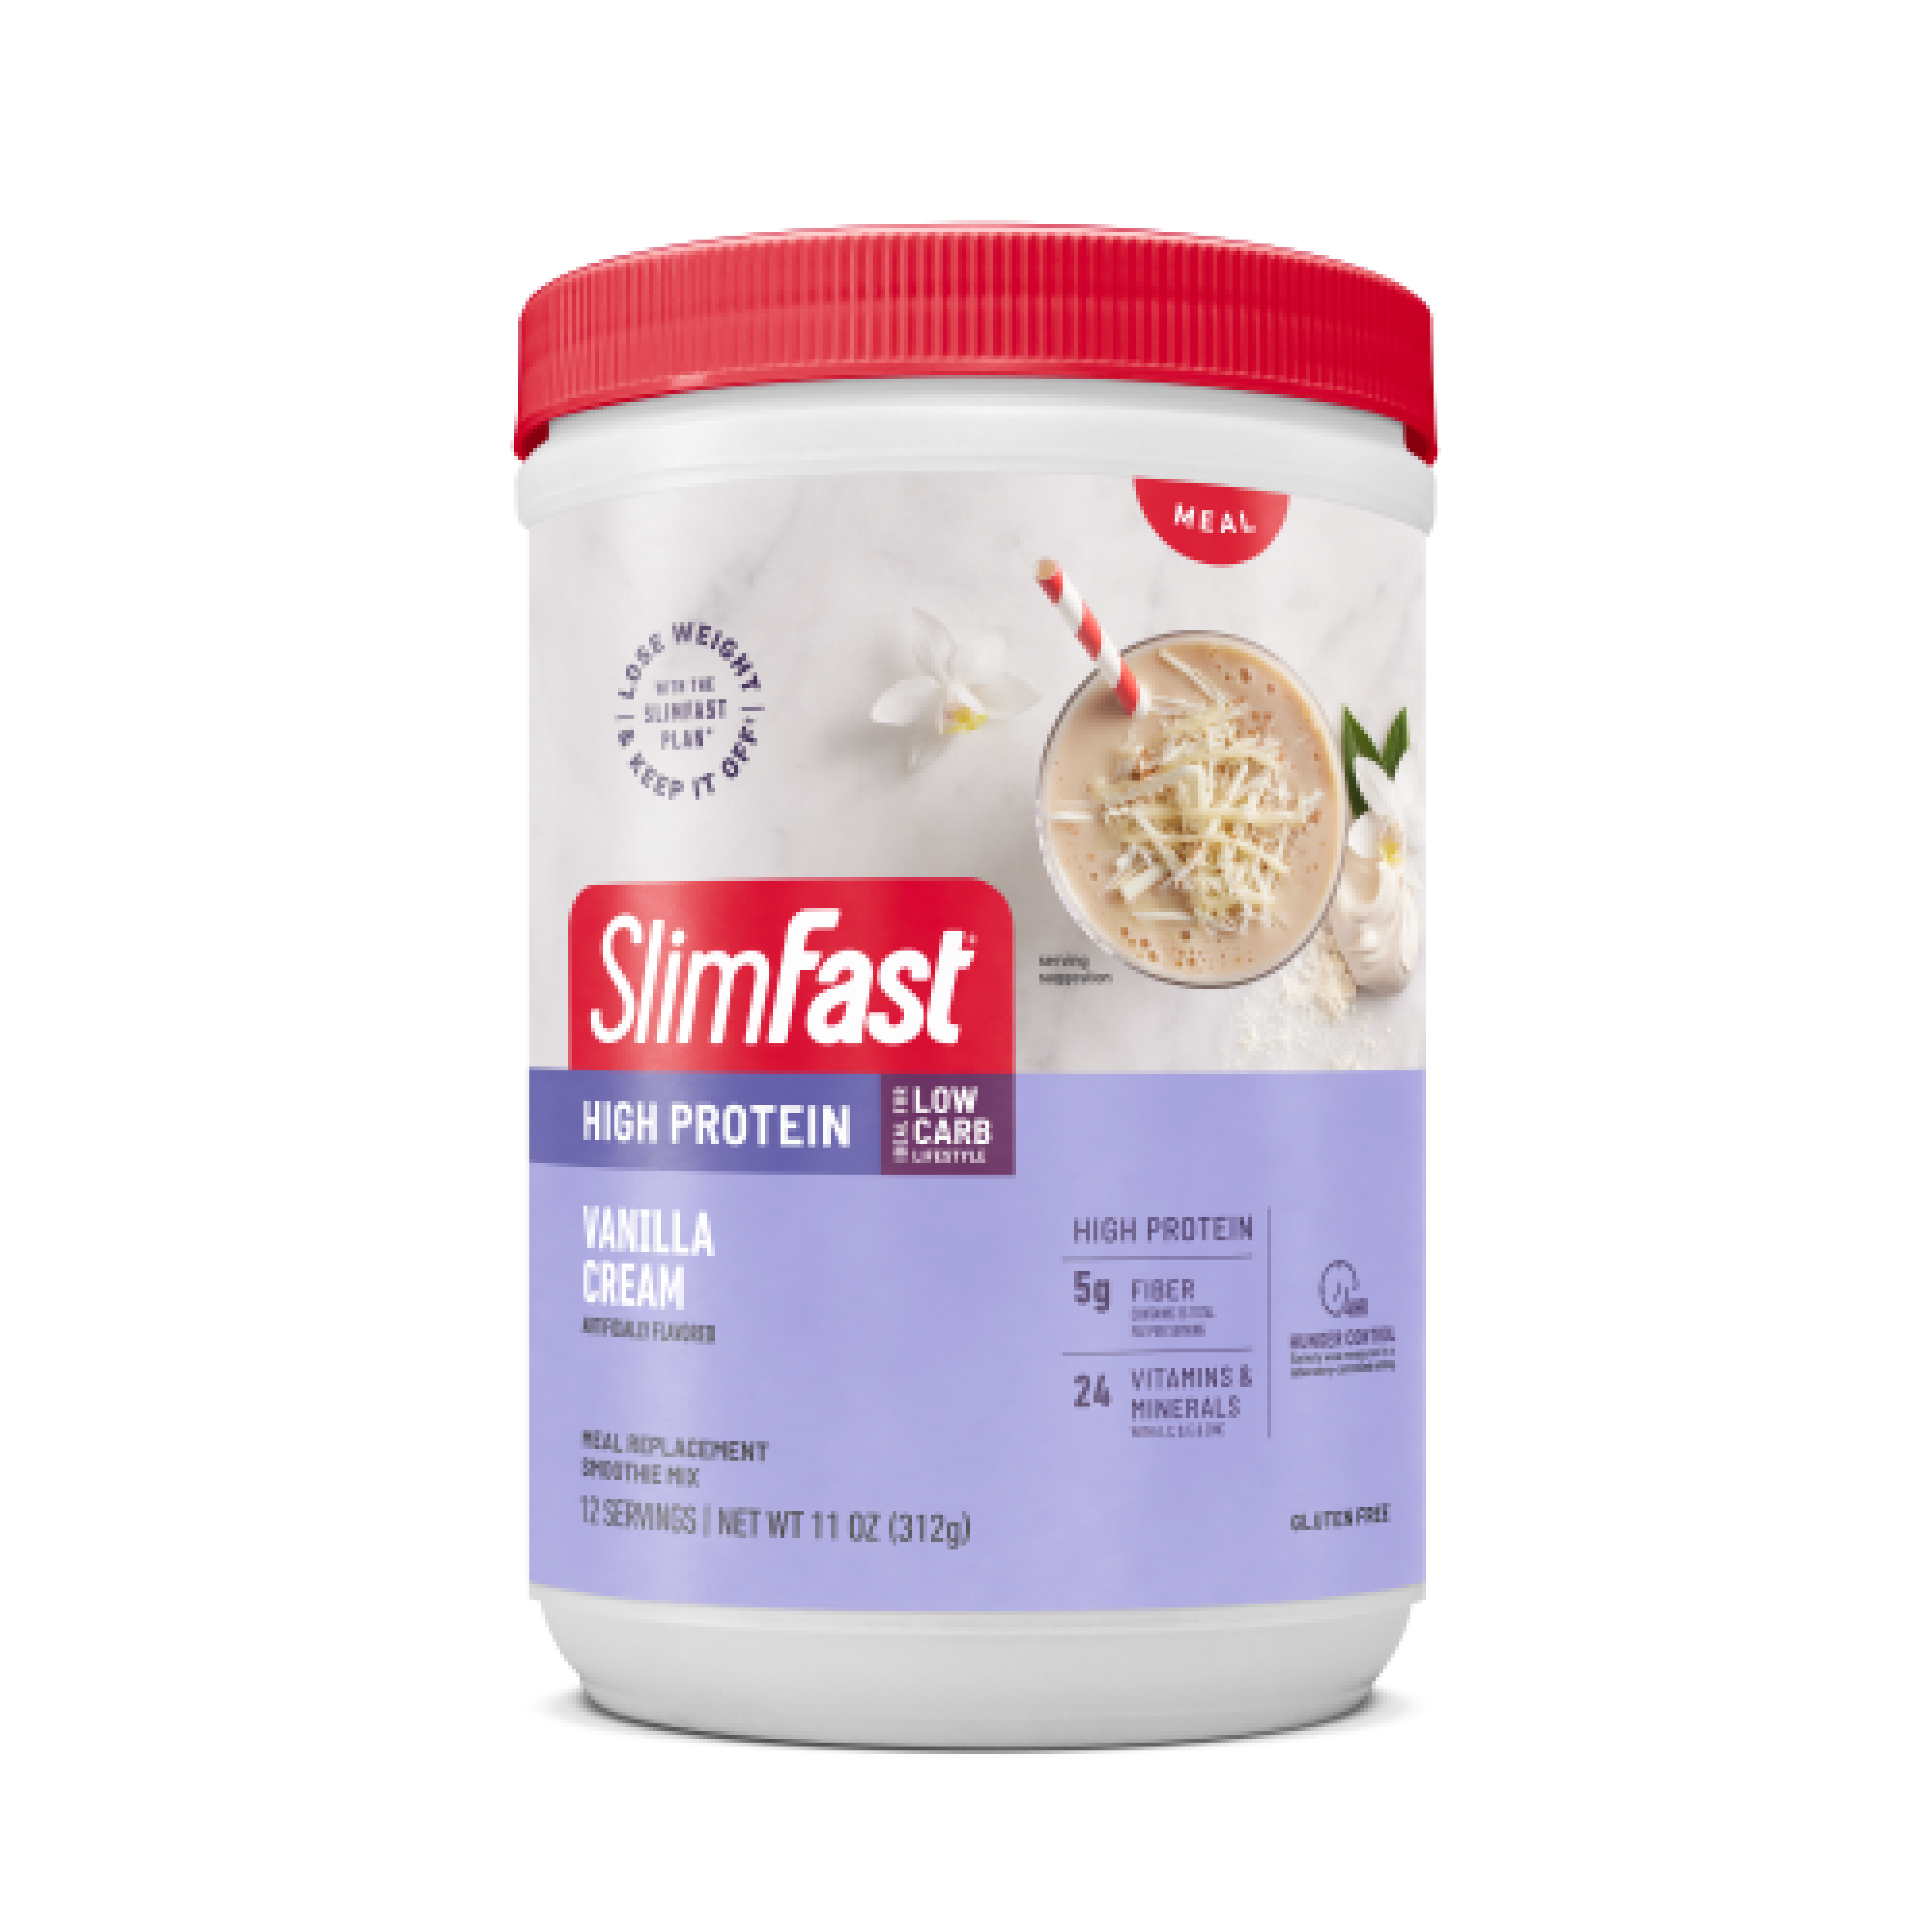 SlimFast High Protein, Vanilla Cream, Meal Replacement Smoothie Mix, 12 Servings - image 1 of 6